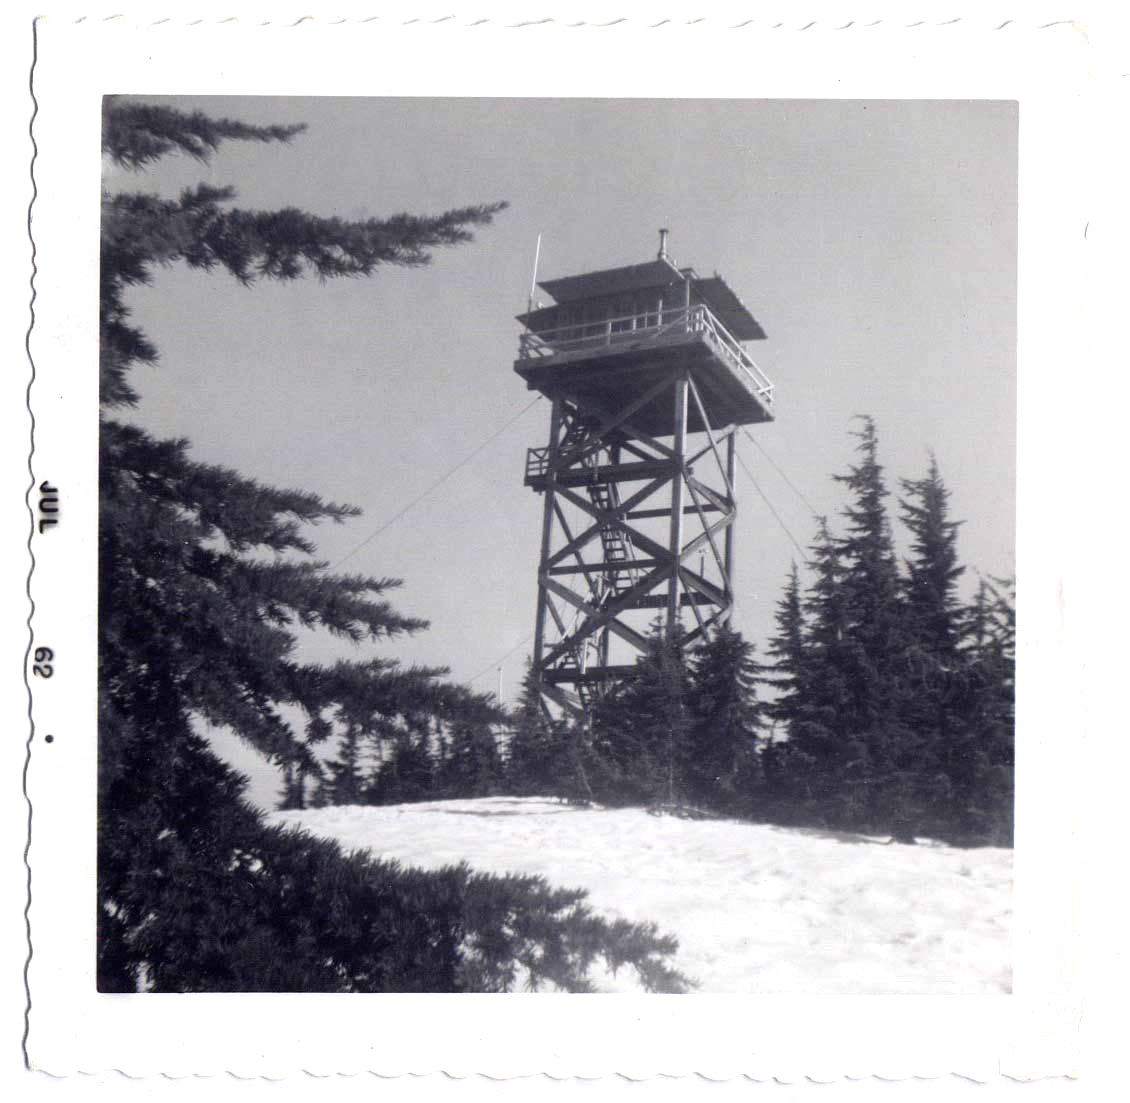 Sisi Butte, Oregon, lookout tower in 1962